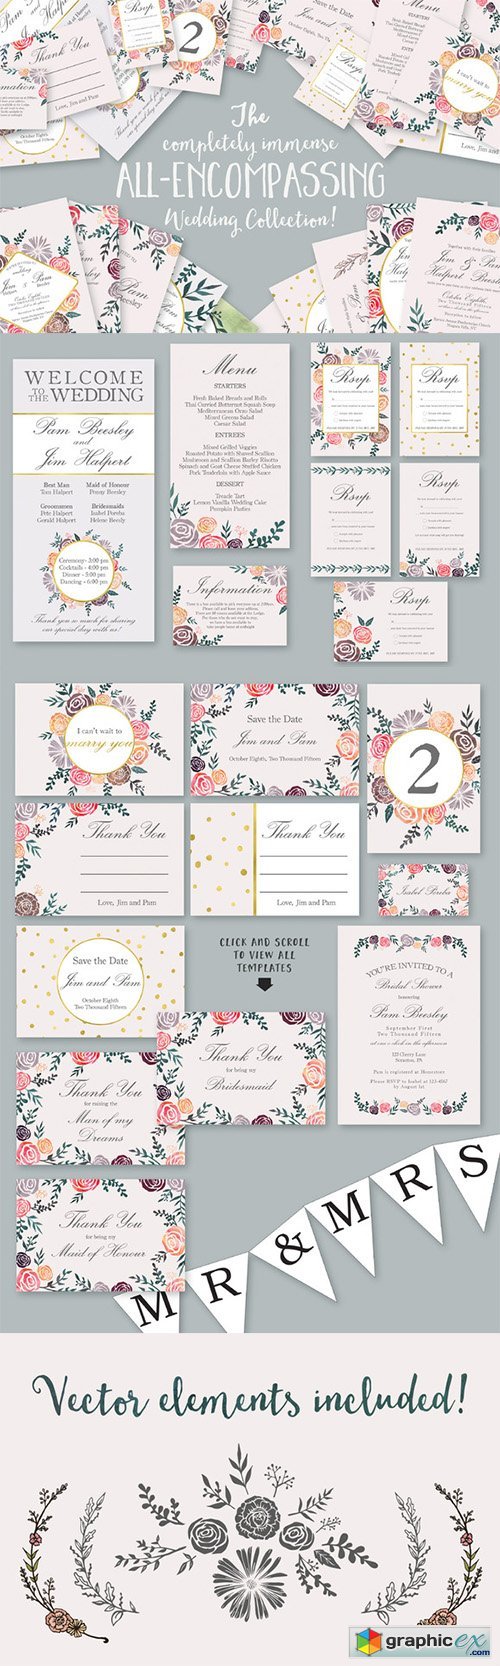 ALL-ENCOMPASSING Wedding Collection